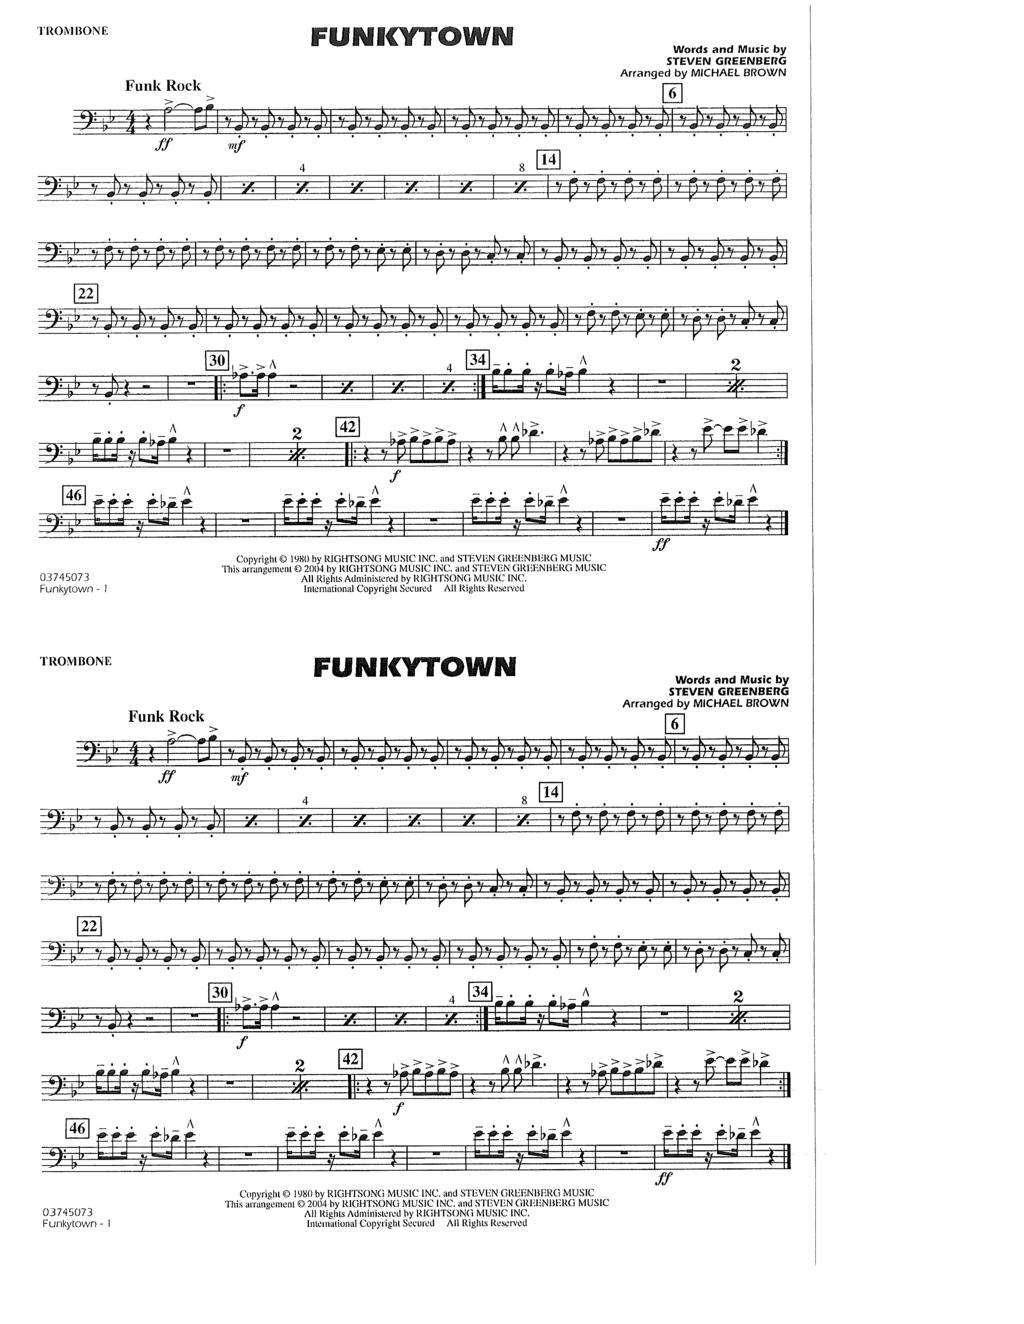 TROMBONE FUWIC OWM Words and Mu ic by TROMBONE FUf icytowf ord nd Music by STE EN GREENBERG Arranged by MICH EL BRO / Copyright 1980 by RIGHTSONG MUSIC INC.